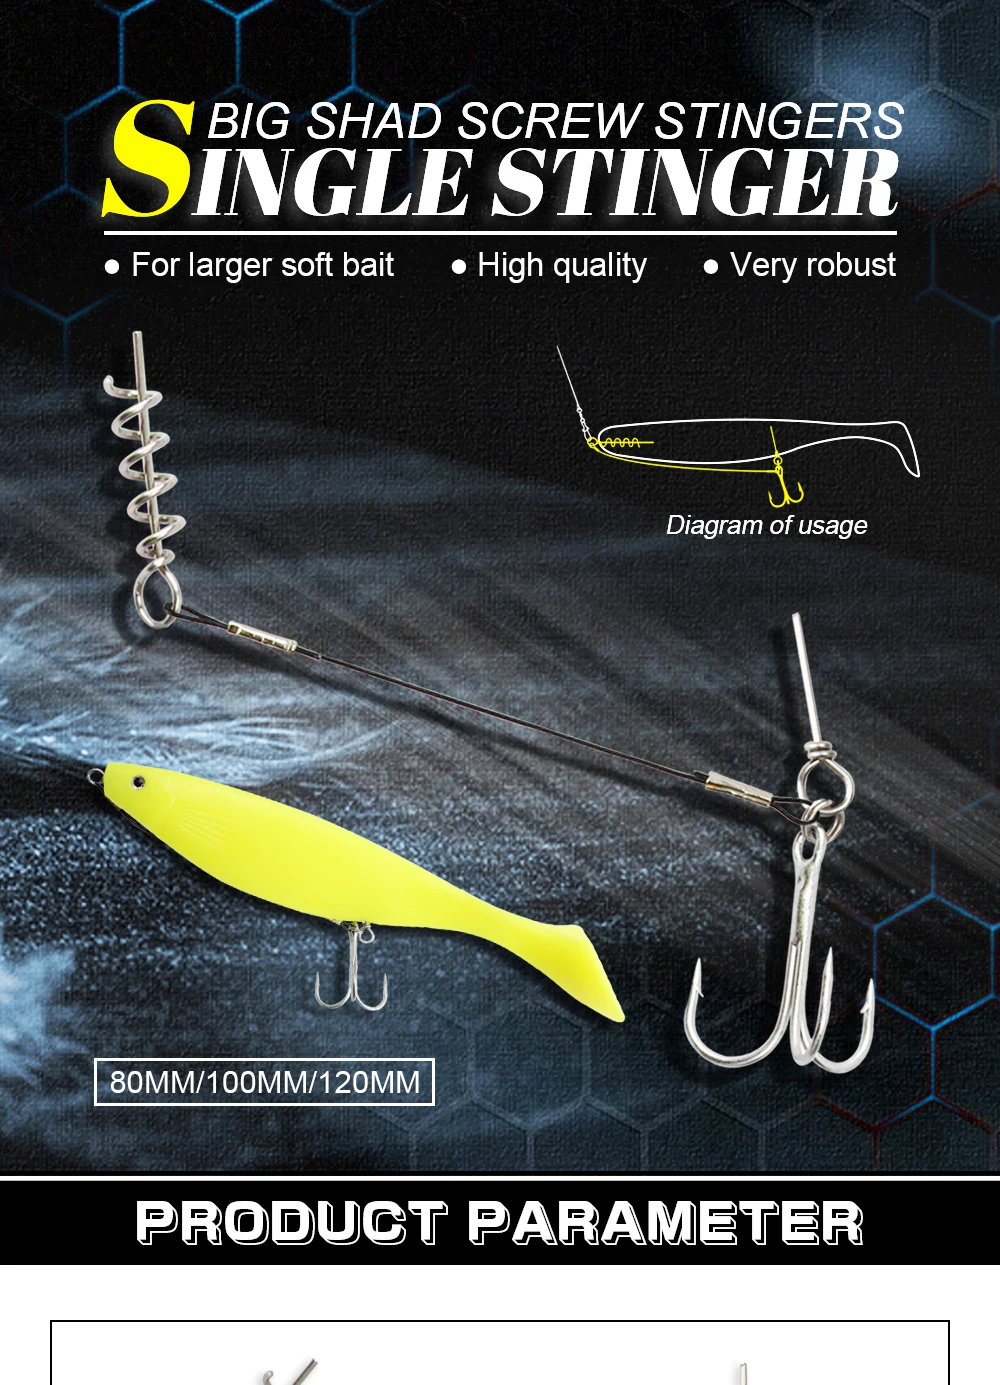 Spinpoler Stinger Rigs For Bigger Soft Lures Treble Hook #1 #1/0 #2/0 With  Shallow Screw Saltwater Sea Fishing Gear Tackle